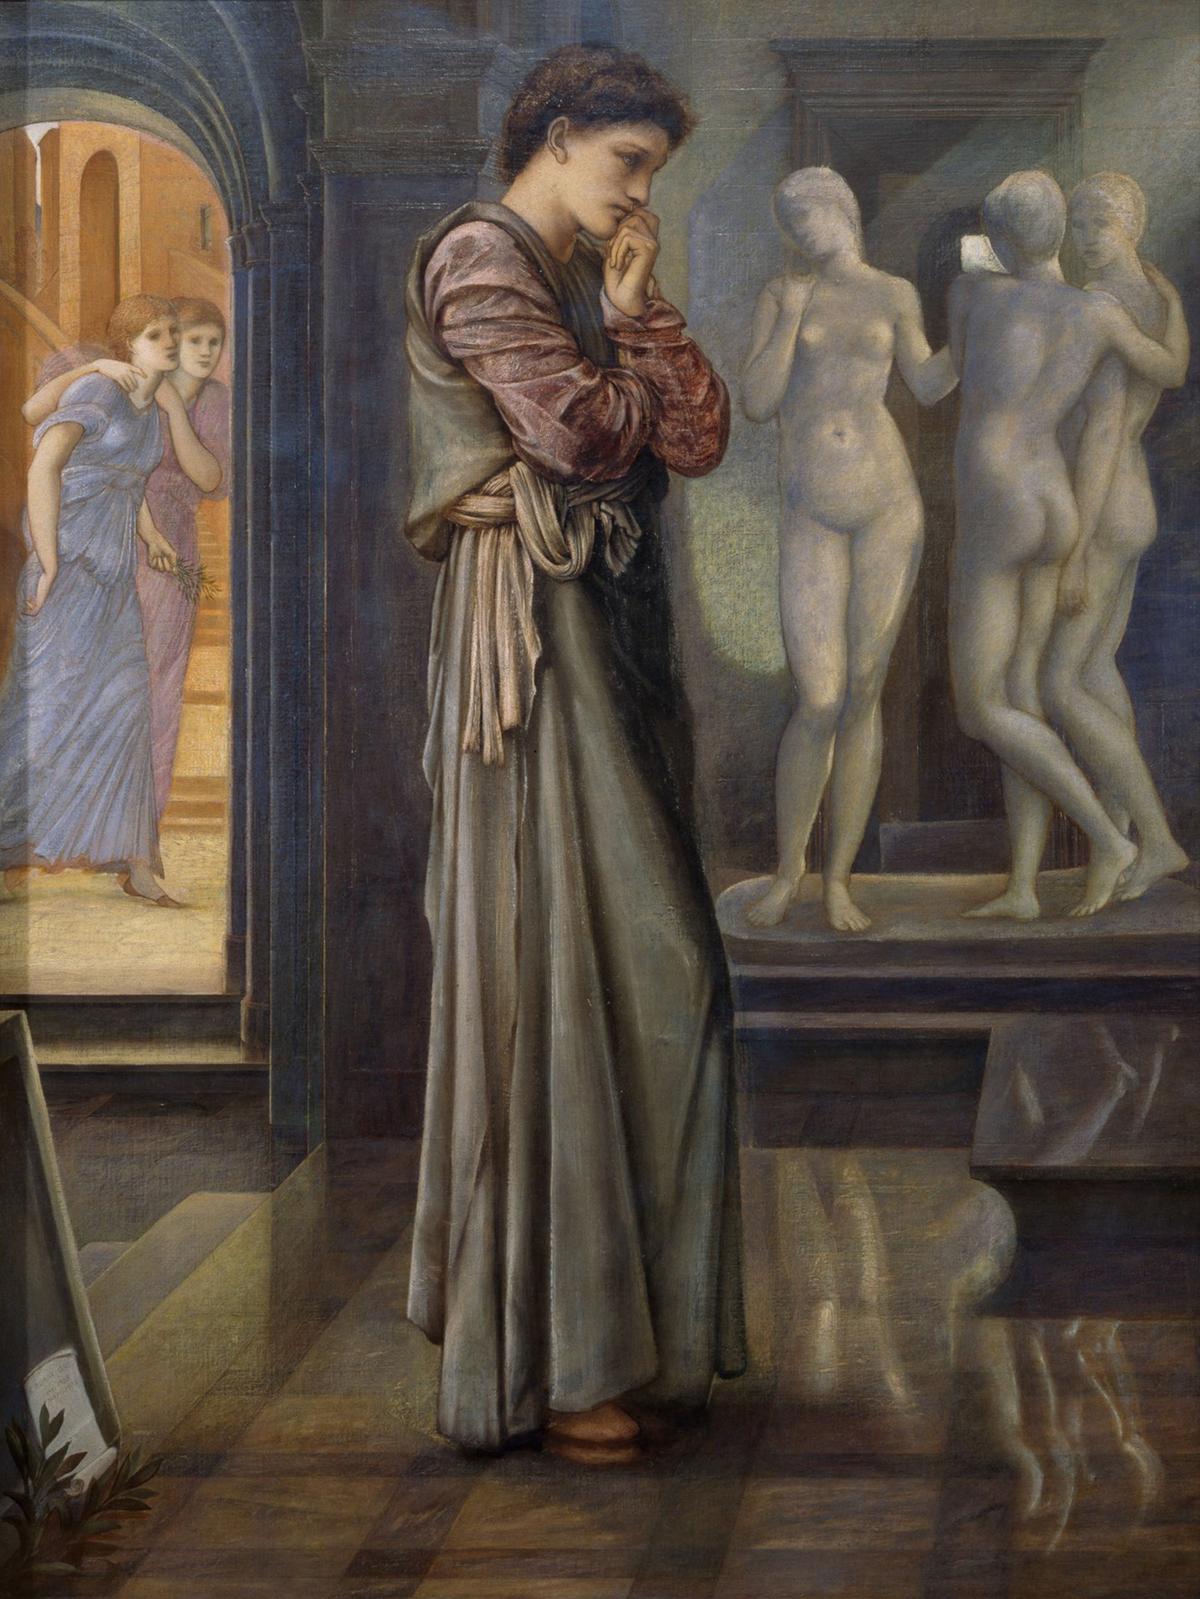 Disgusted by the vices of the Propoetides (L), Pygmalion focuses single-mindedly on creating beautiful art. "Pygmalion and the Image – The Heart Desires," 1878, by Sir Edward Burne-Jones. Birmingham Museums Trust. (Public Domain)